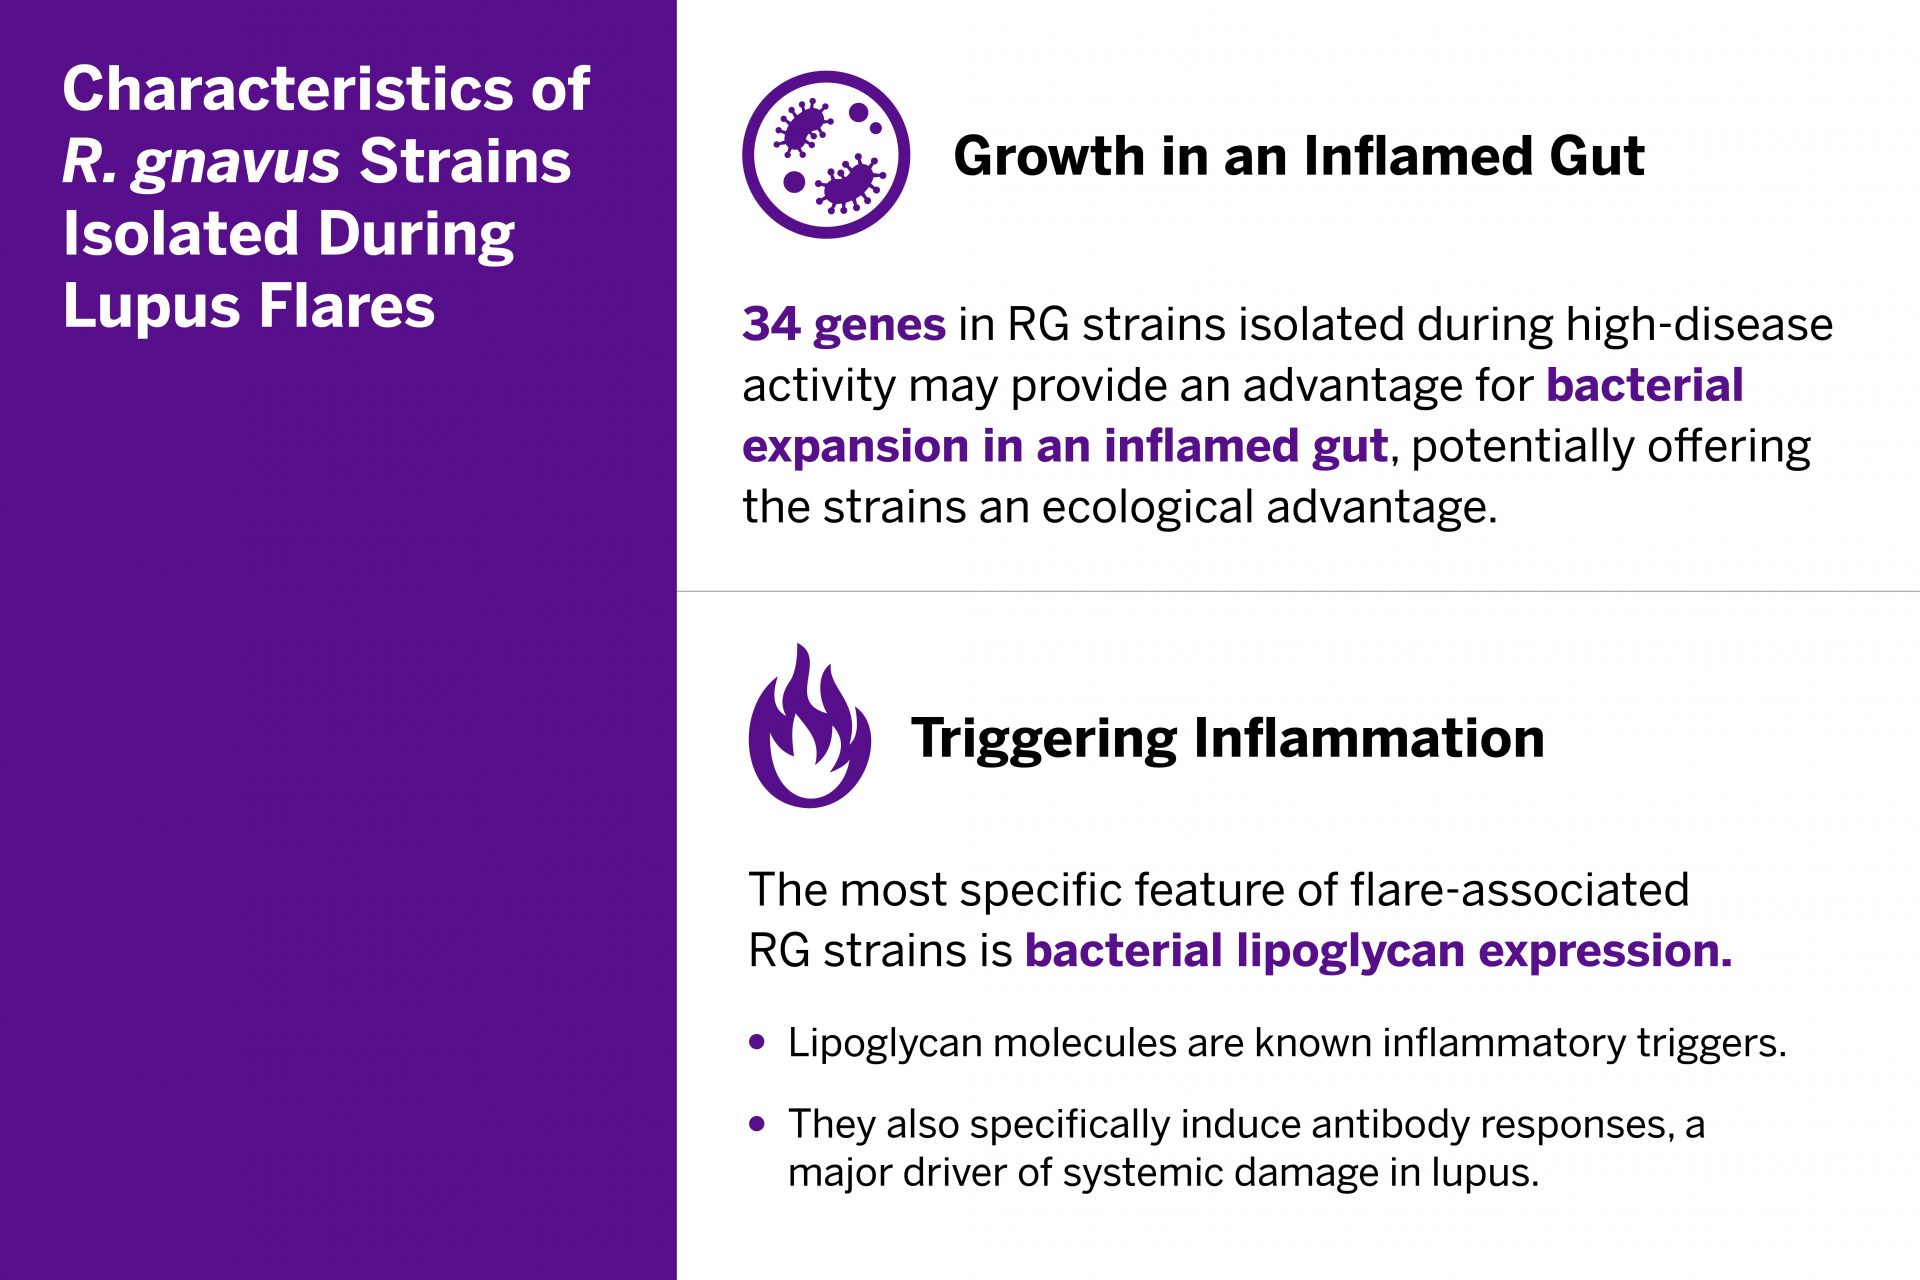 The researchers identified 34 genes that may provide the bacteria a growth advantage in an inflamed gut and isolated specific bacterial lipoglycans recognized as inflammatory triggers.